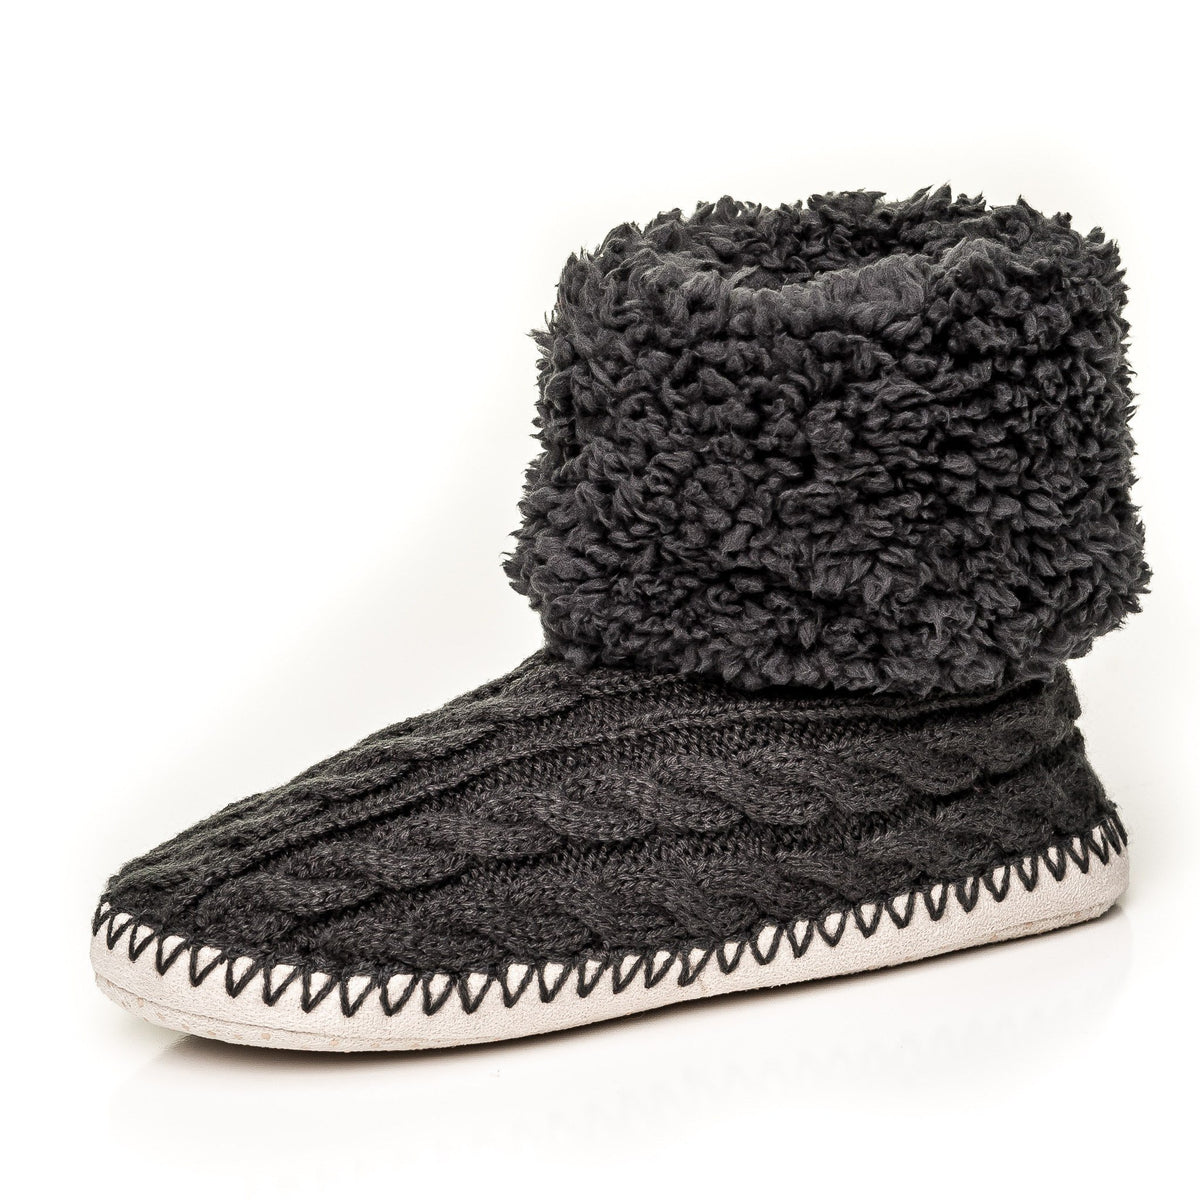 Women's Fuzzy Delight Cable Knit Indoor Short Boot Slippers - Dark Gray